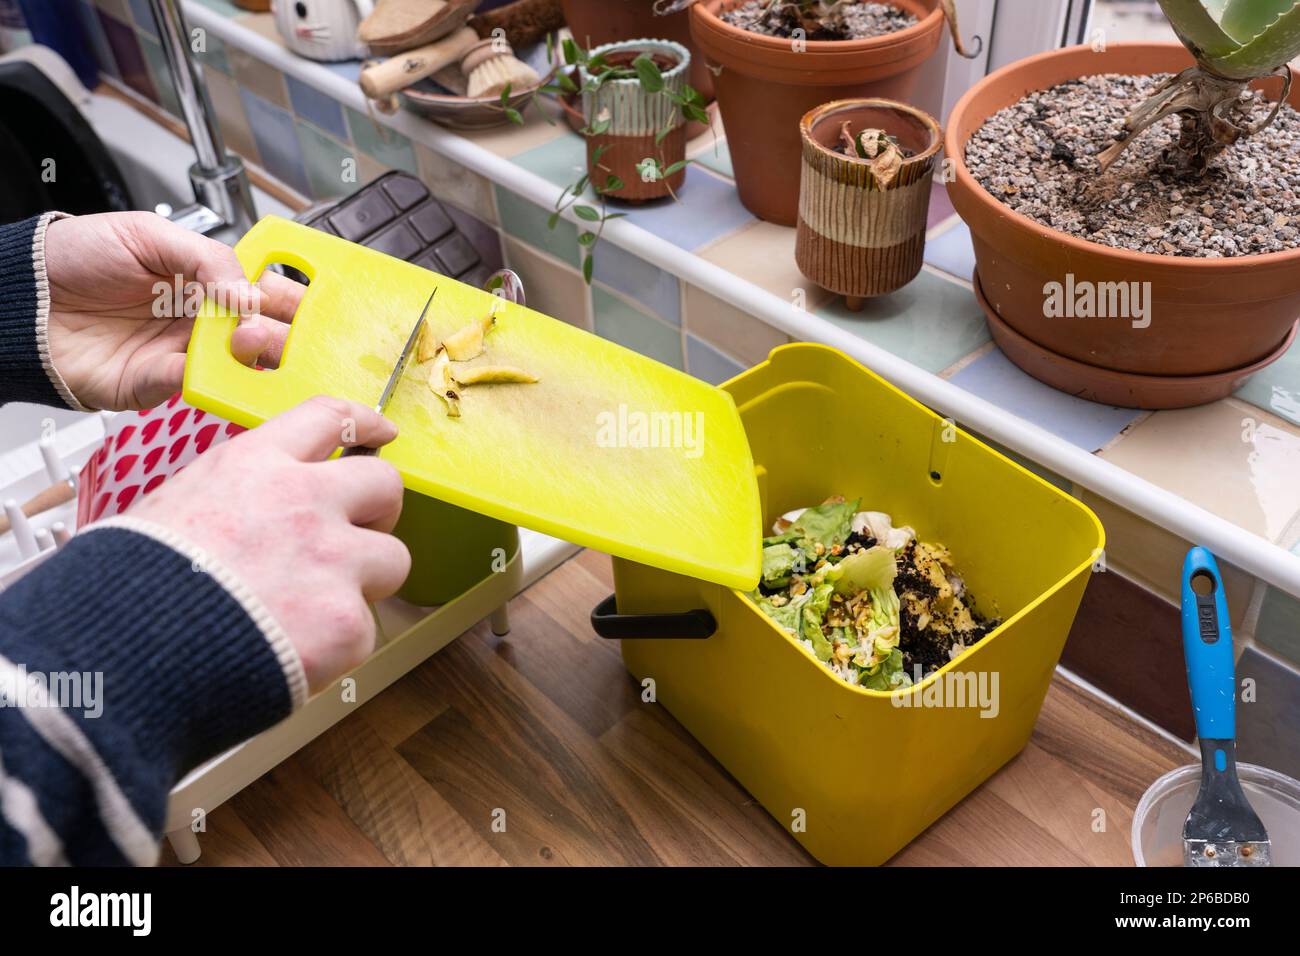 A man pushing food waste from a chopping board into a food recycling bin in a domestic kitchen, ready for composting, UK Stock Photo